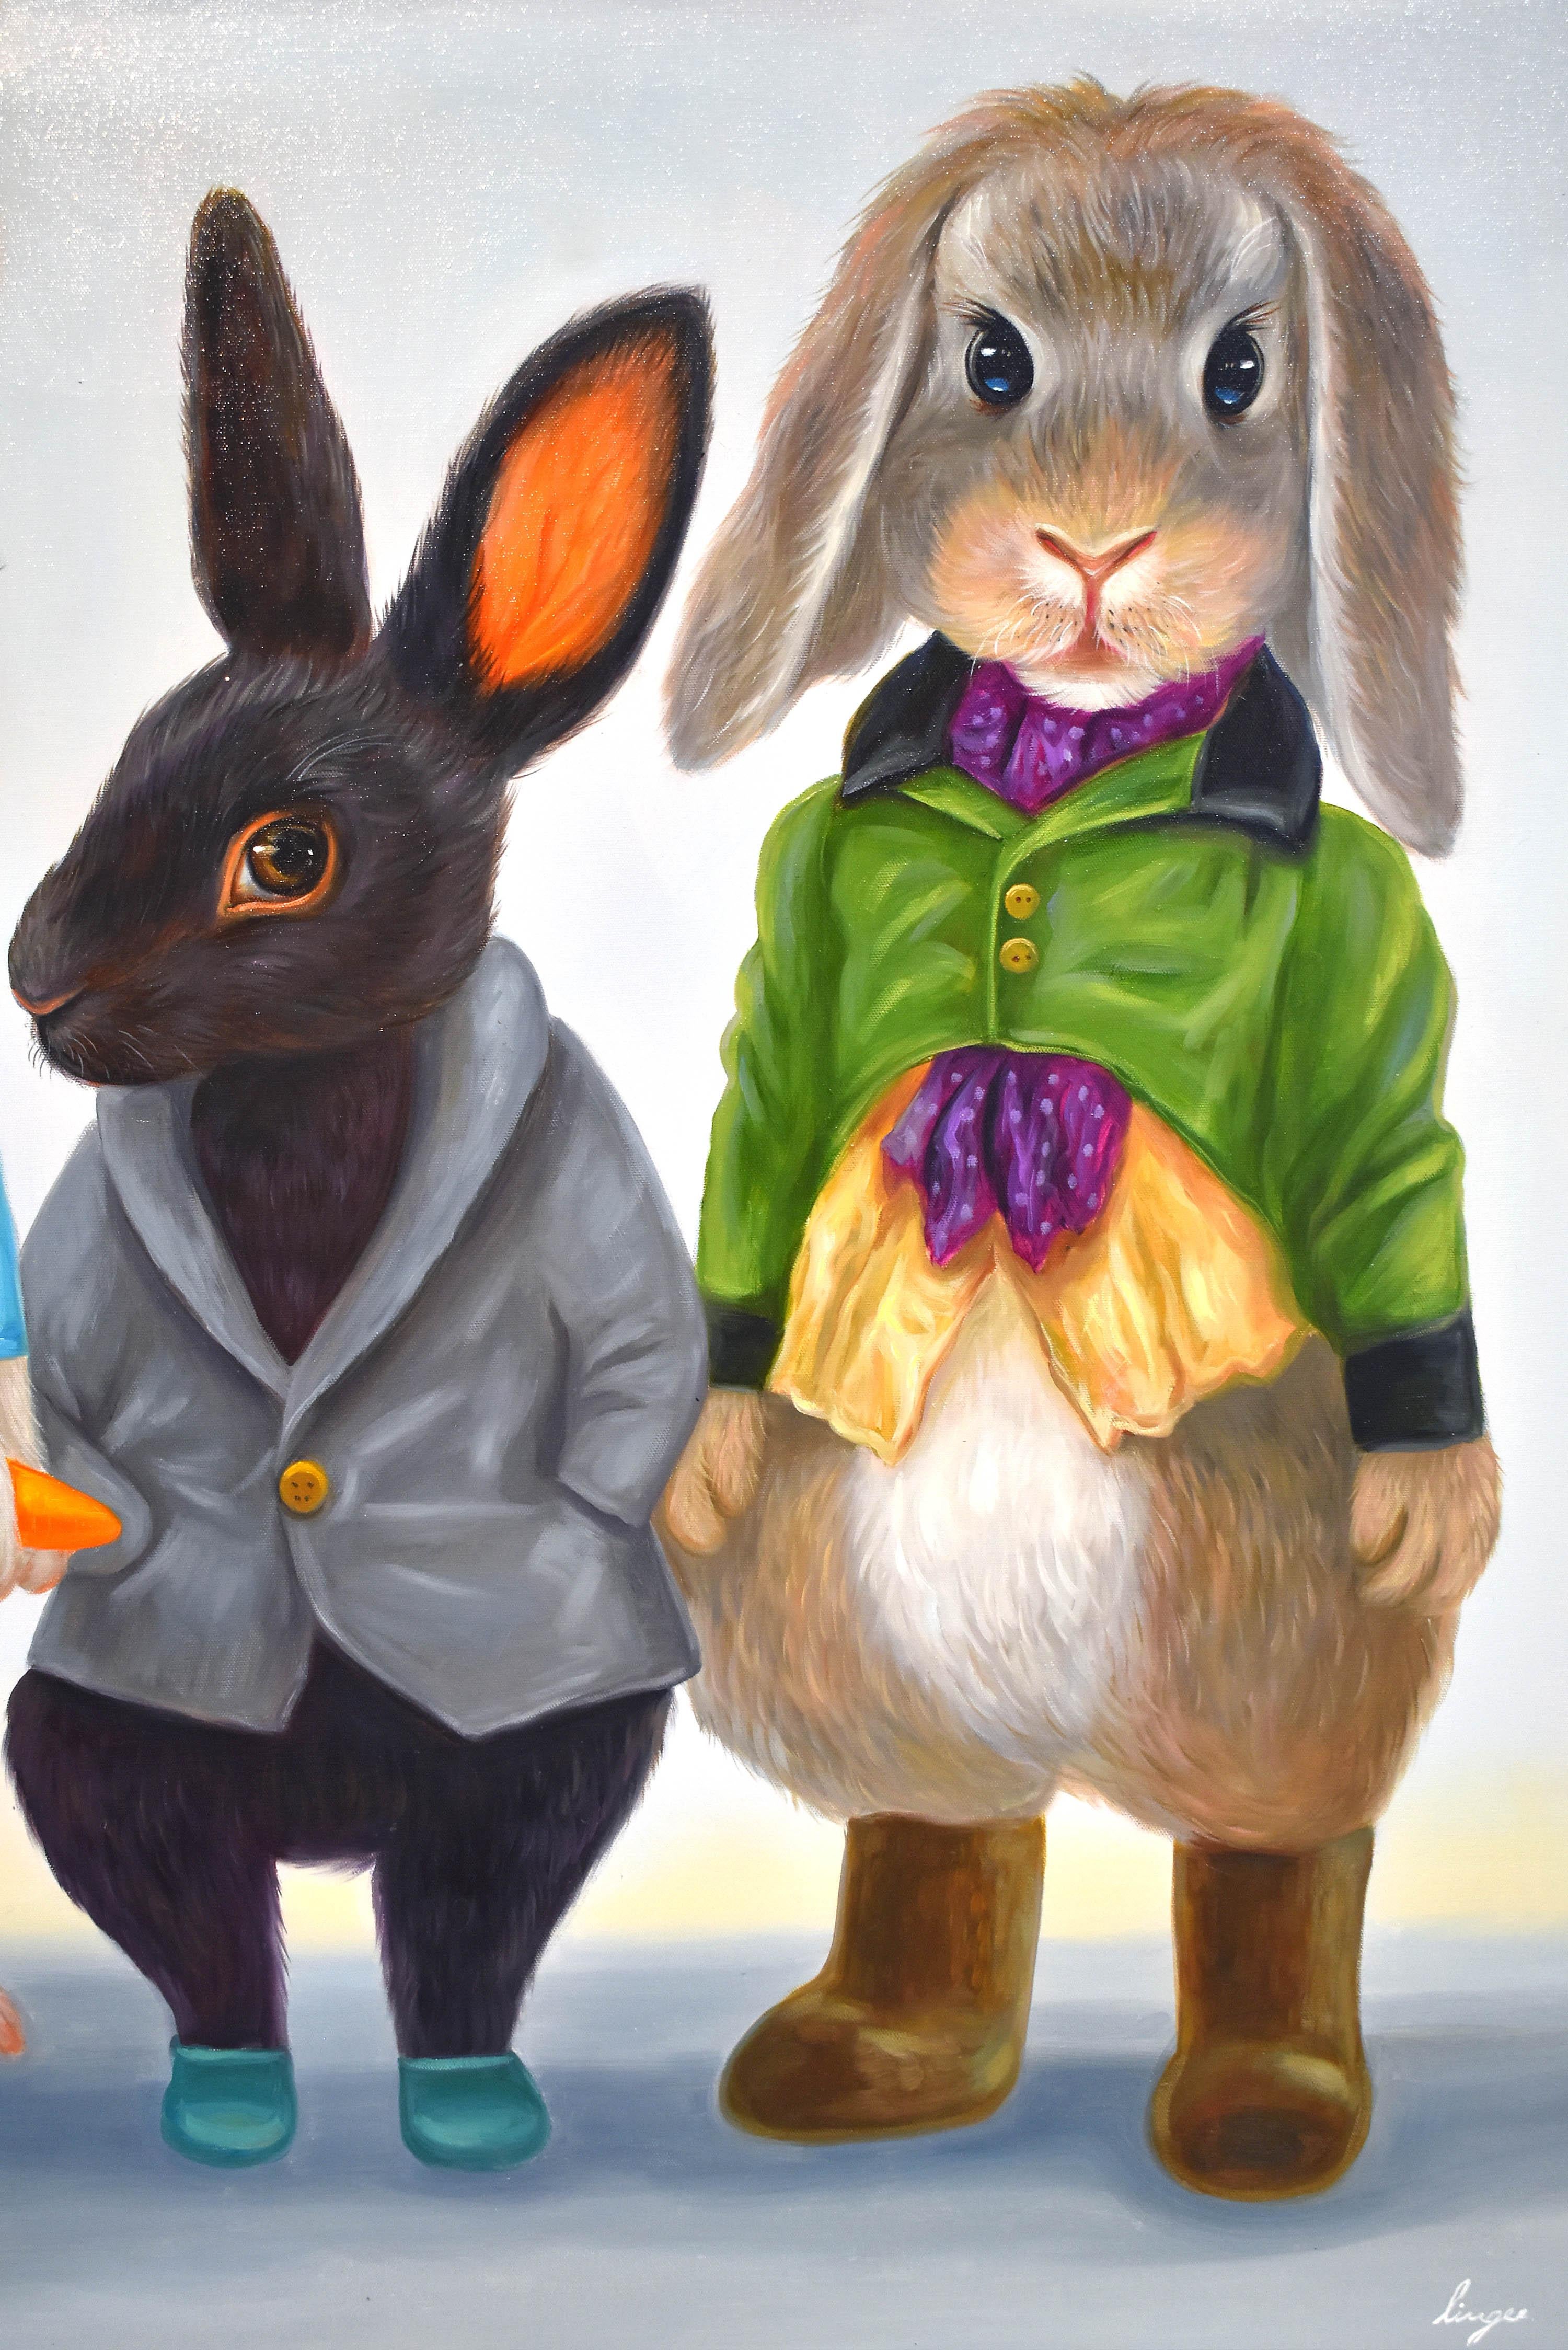 Lingee is a Fine Artist whose works denote a whimsy and semi-realistic portrayal of her subjects. She enjoys painting animals and subjects around her environment. She portrays the rabbits peeking through a hole in a wall would make a charming